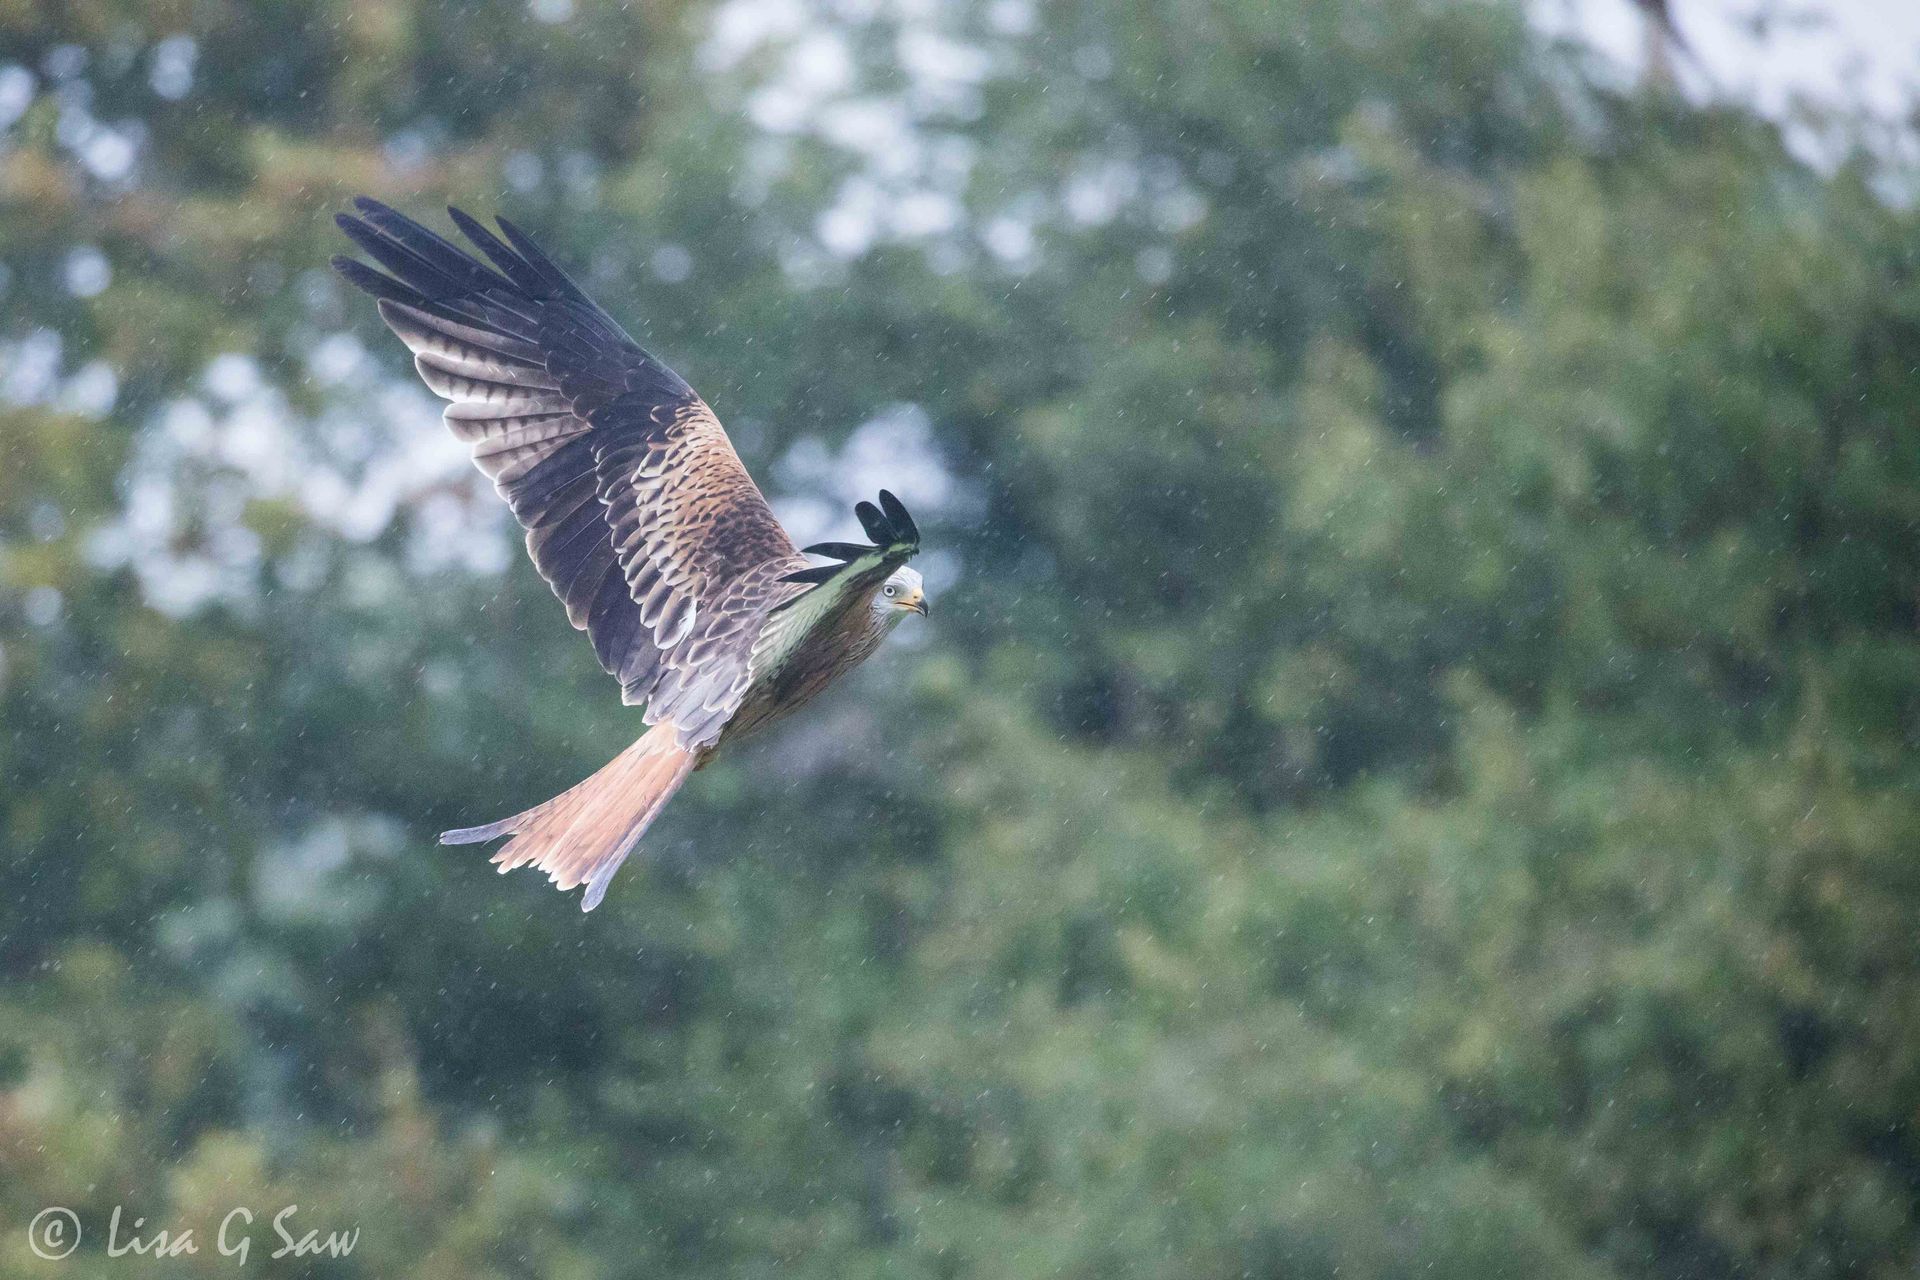 Red Kite flying in the rain, Gigrin Farm, Wales